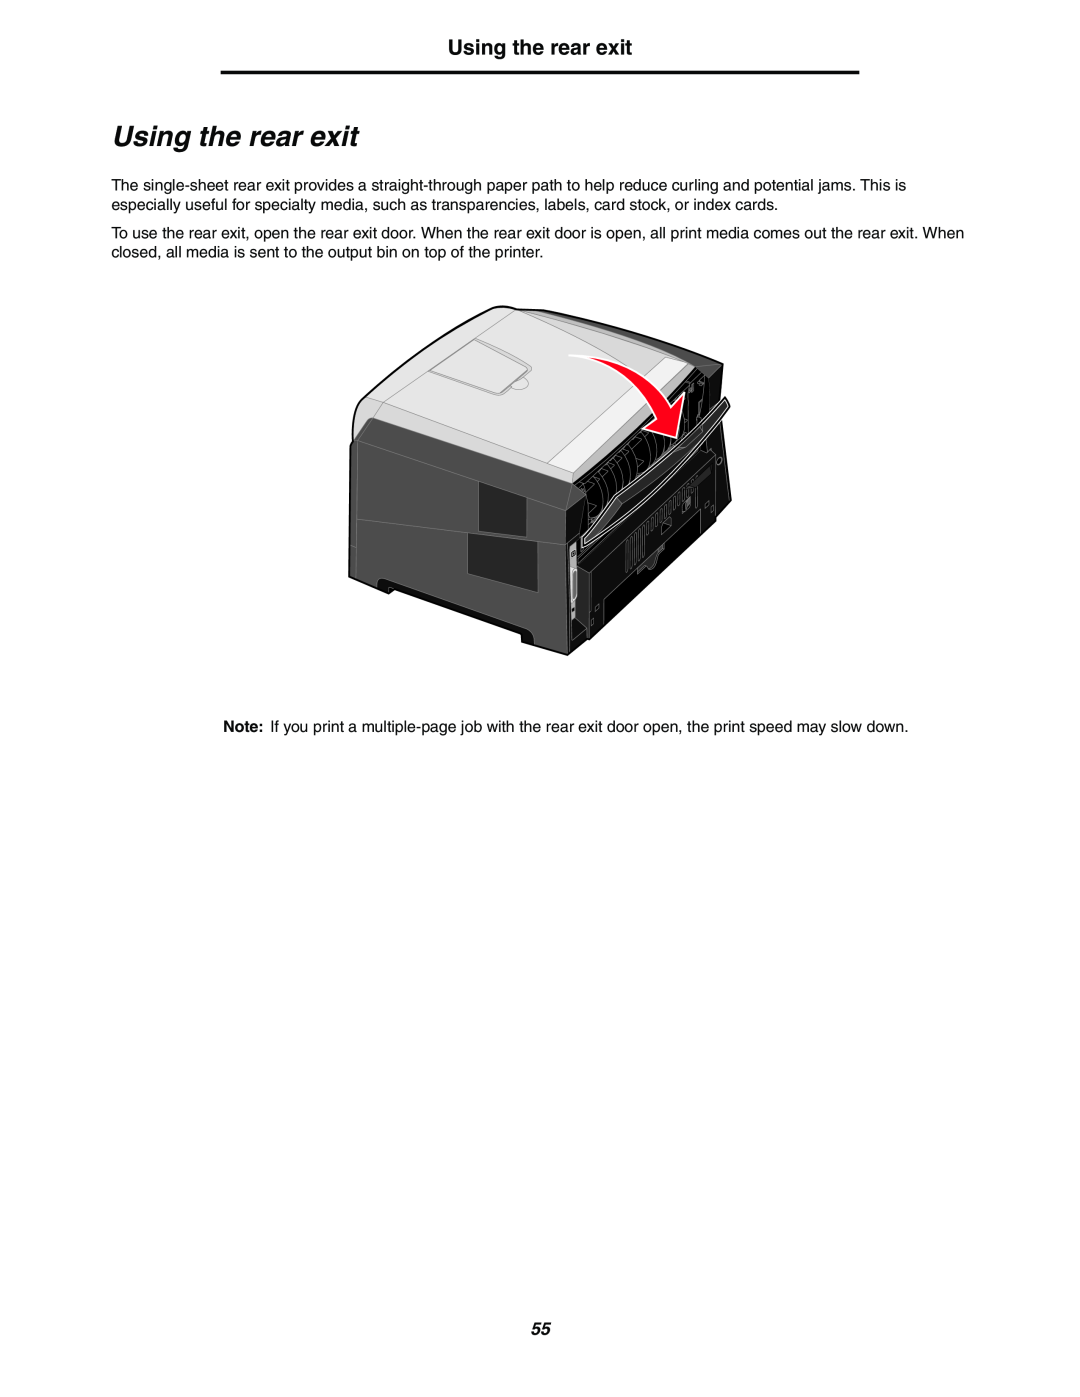 Lexmark 250dn manual Using the rear exit 